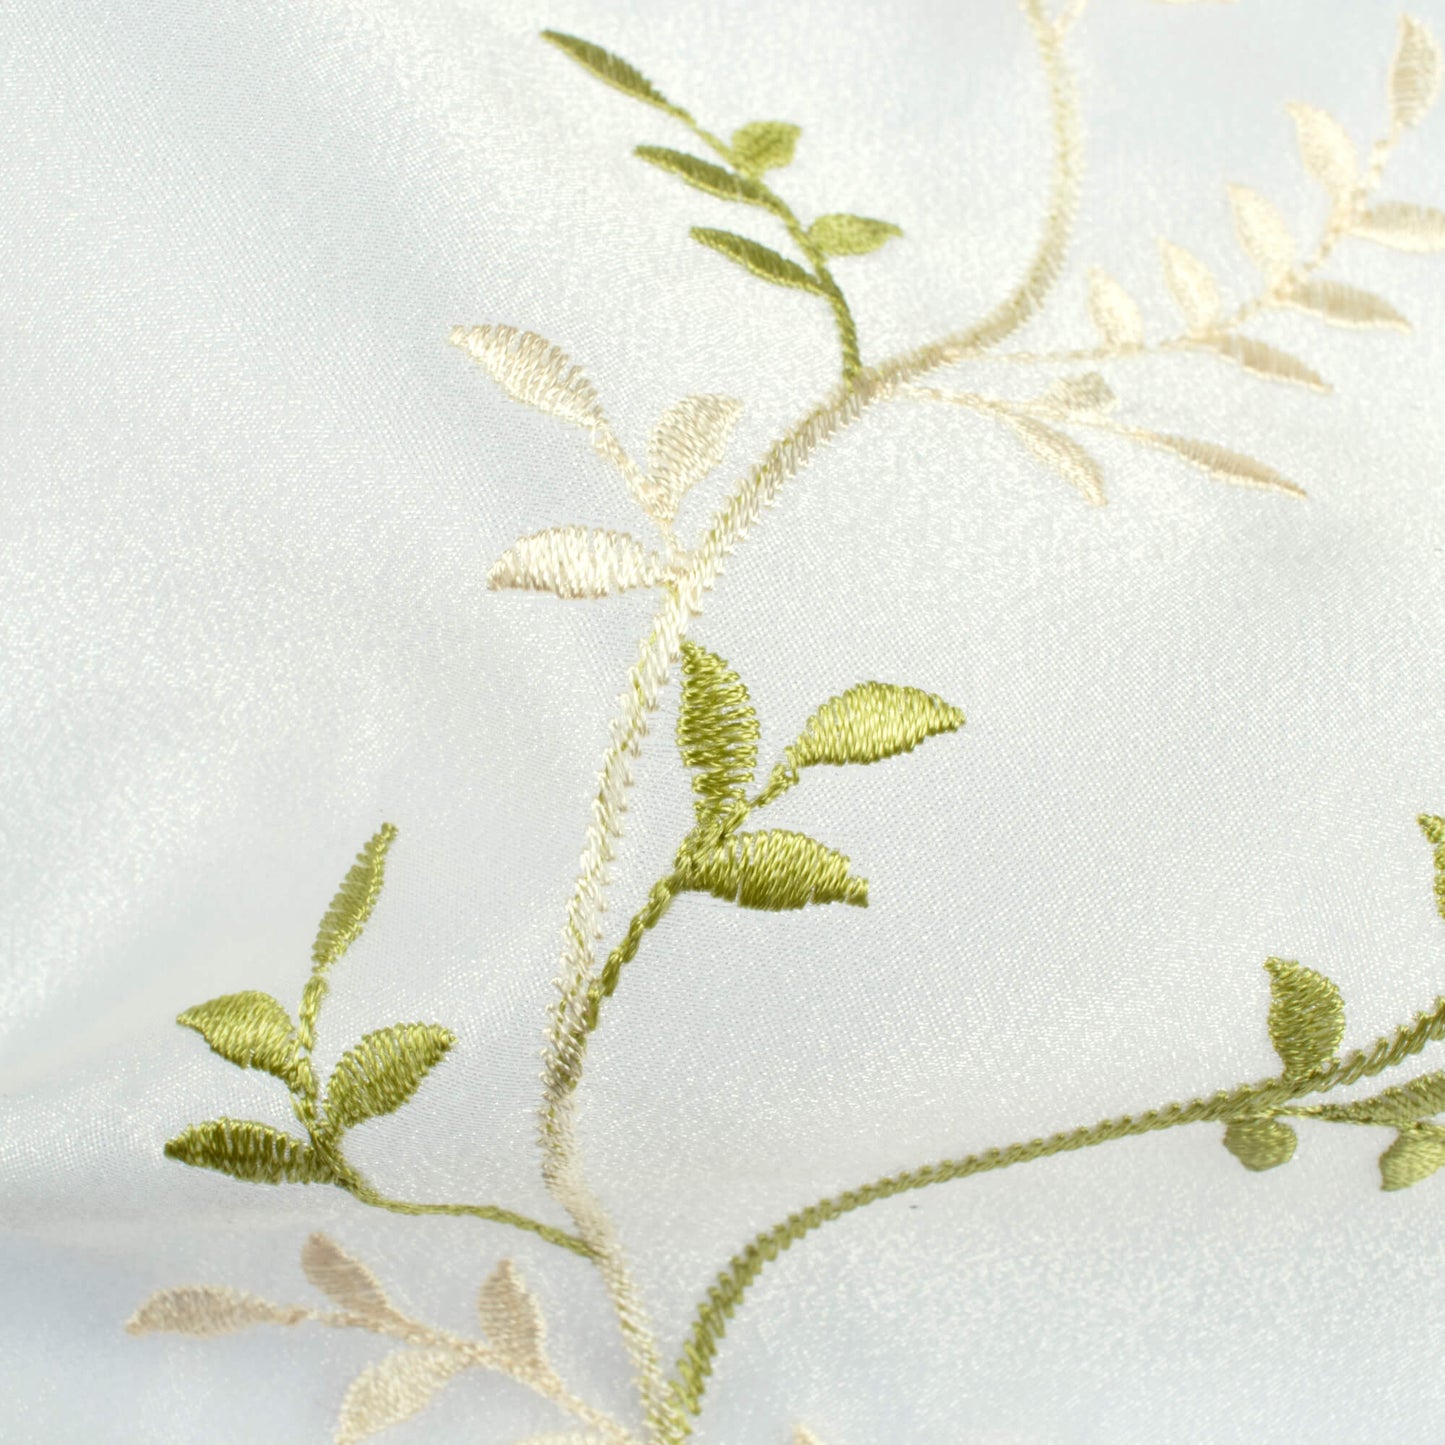 Off White And Parrot Green Embroidery Organza Tissue Premium Sheer Fabric (Width 48 Inches)